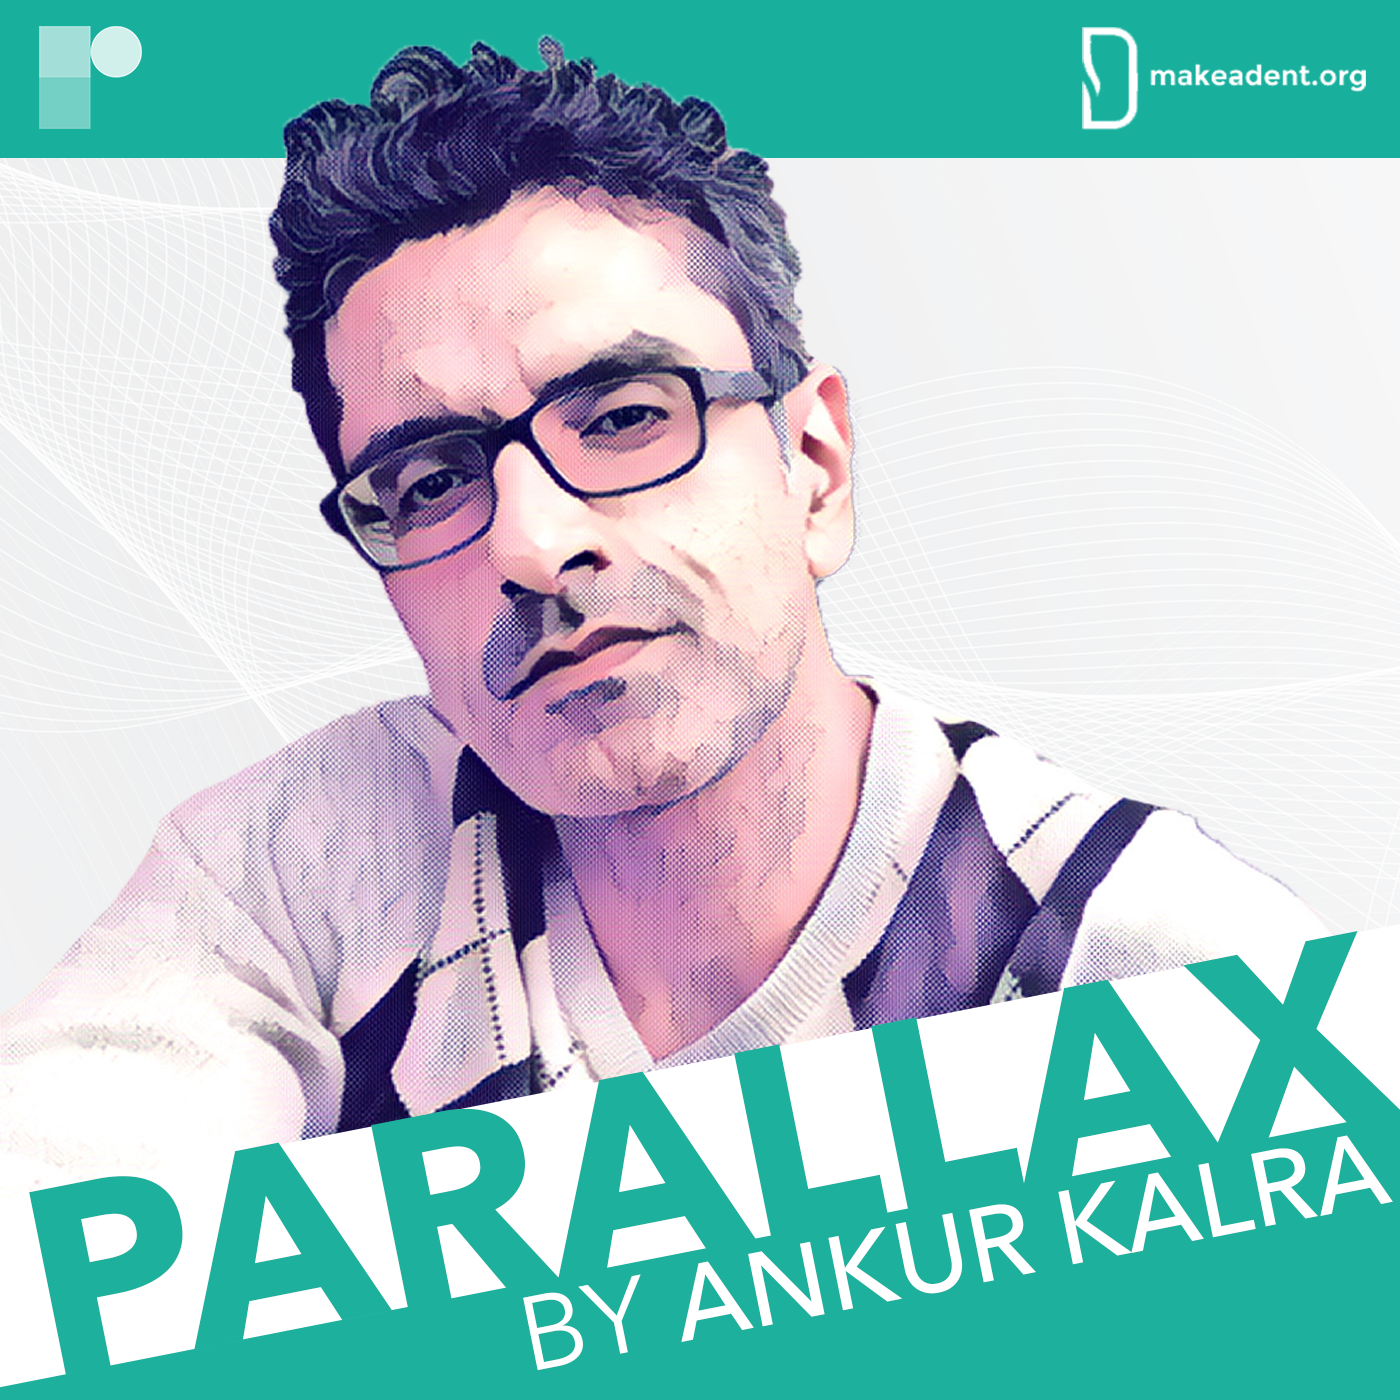 The Parallax Podcast